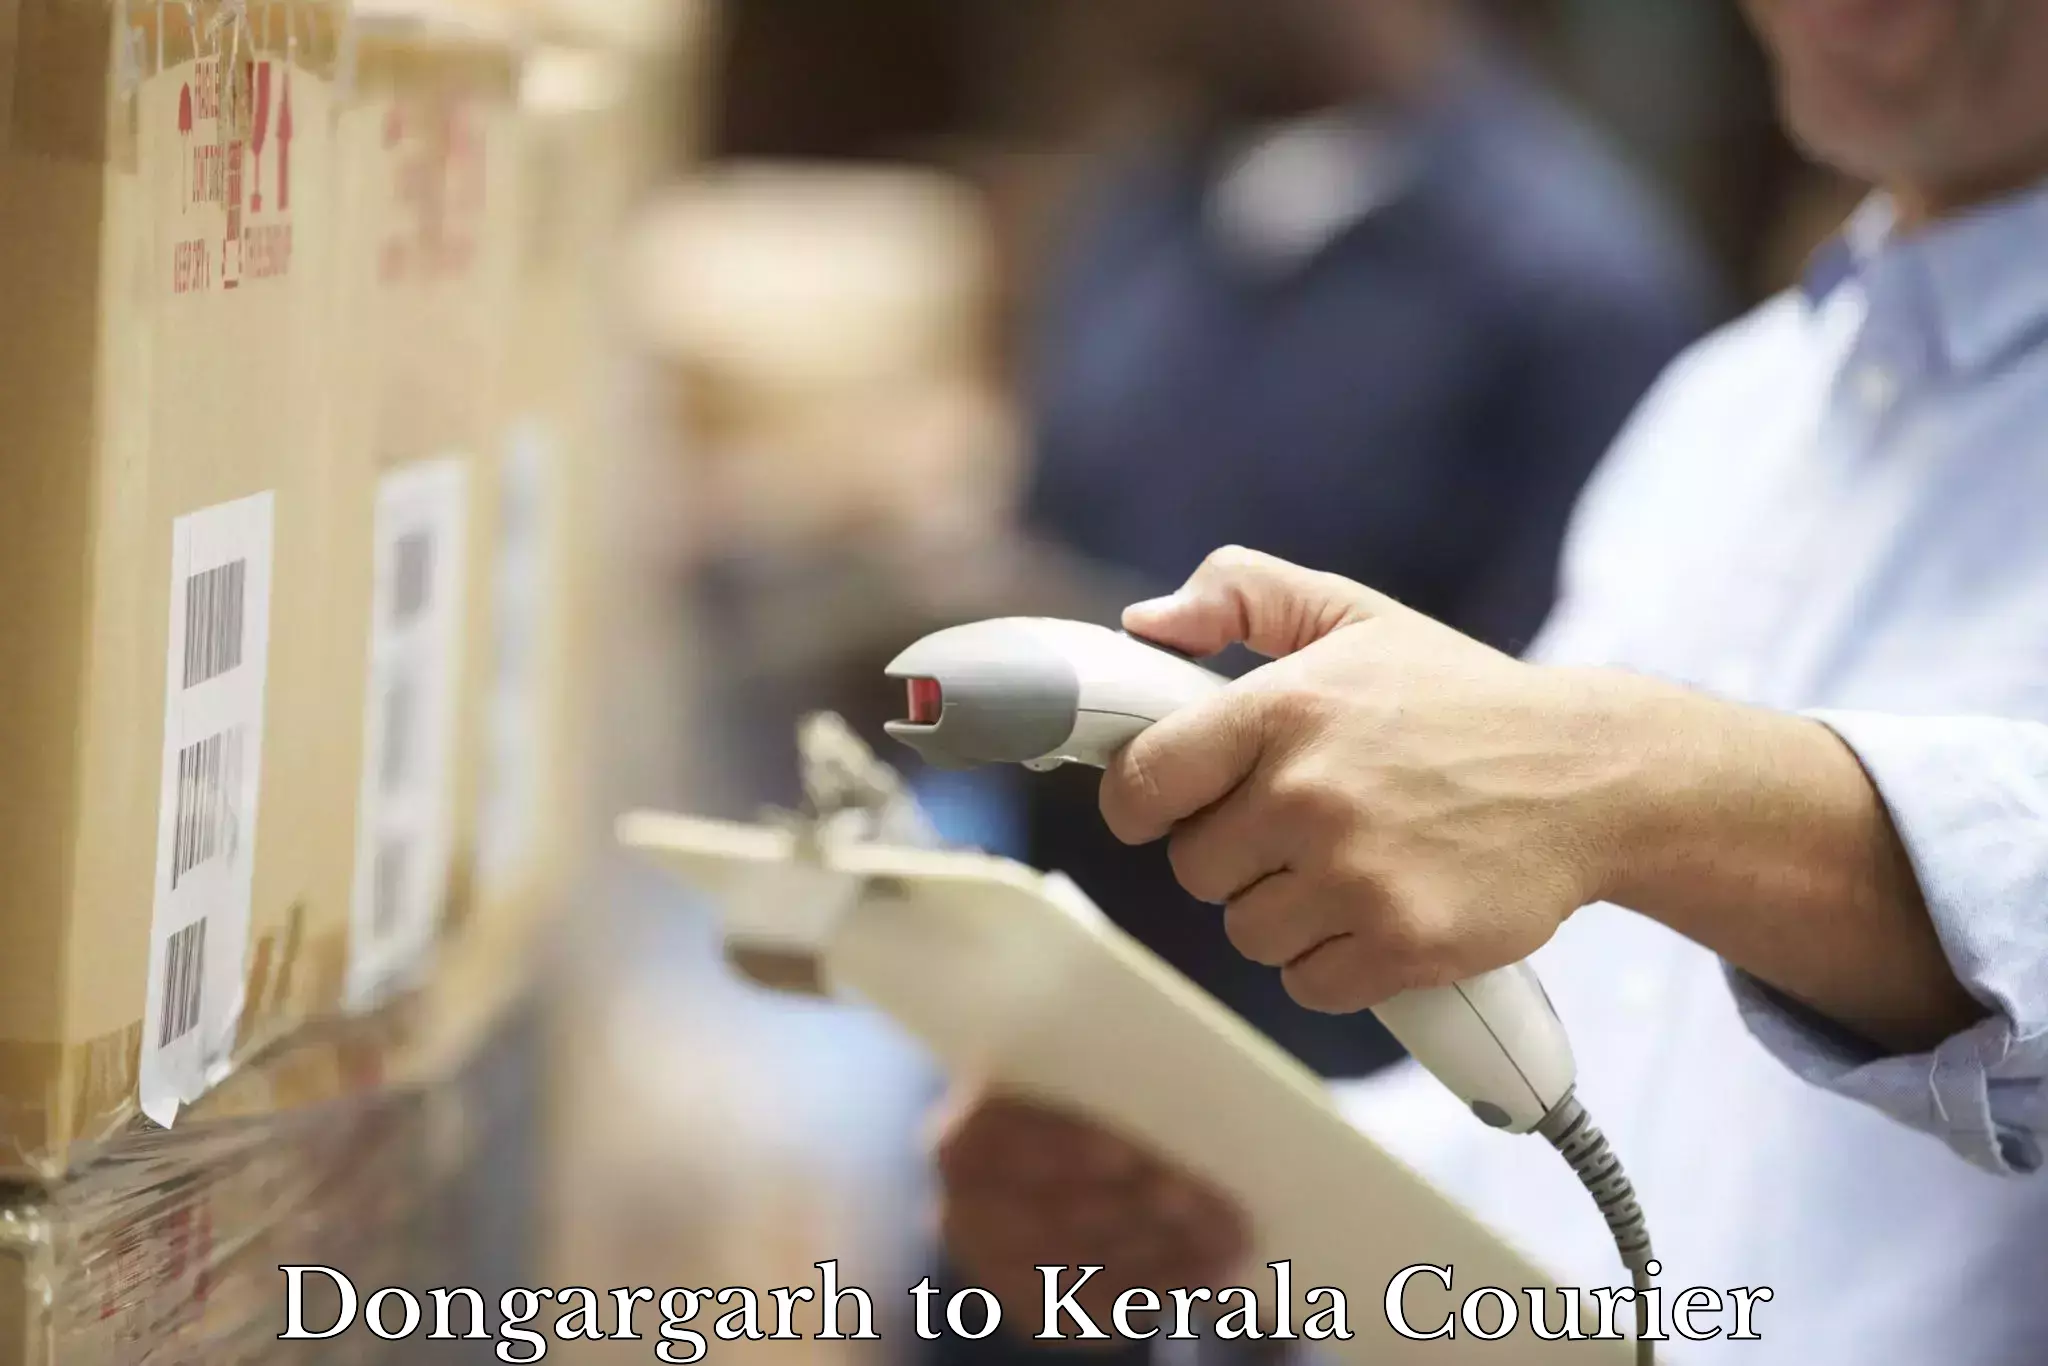 24-hour delivery options Dongargarh to Kattappana